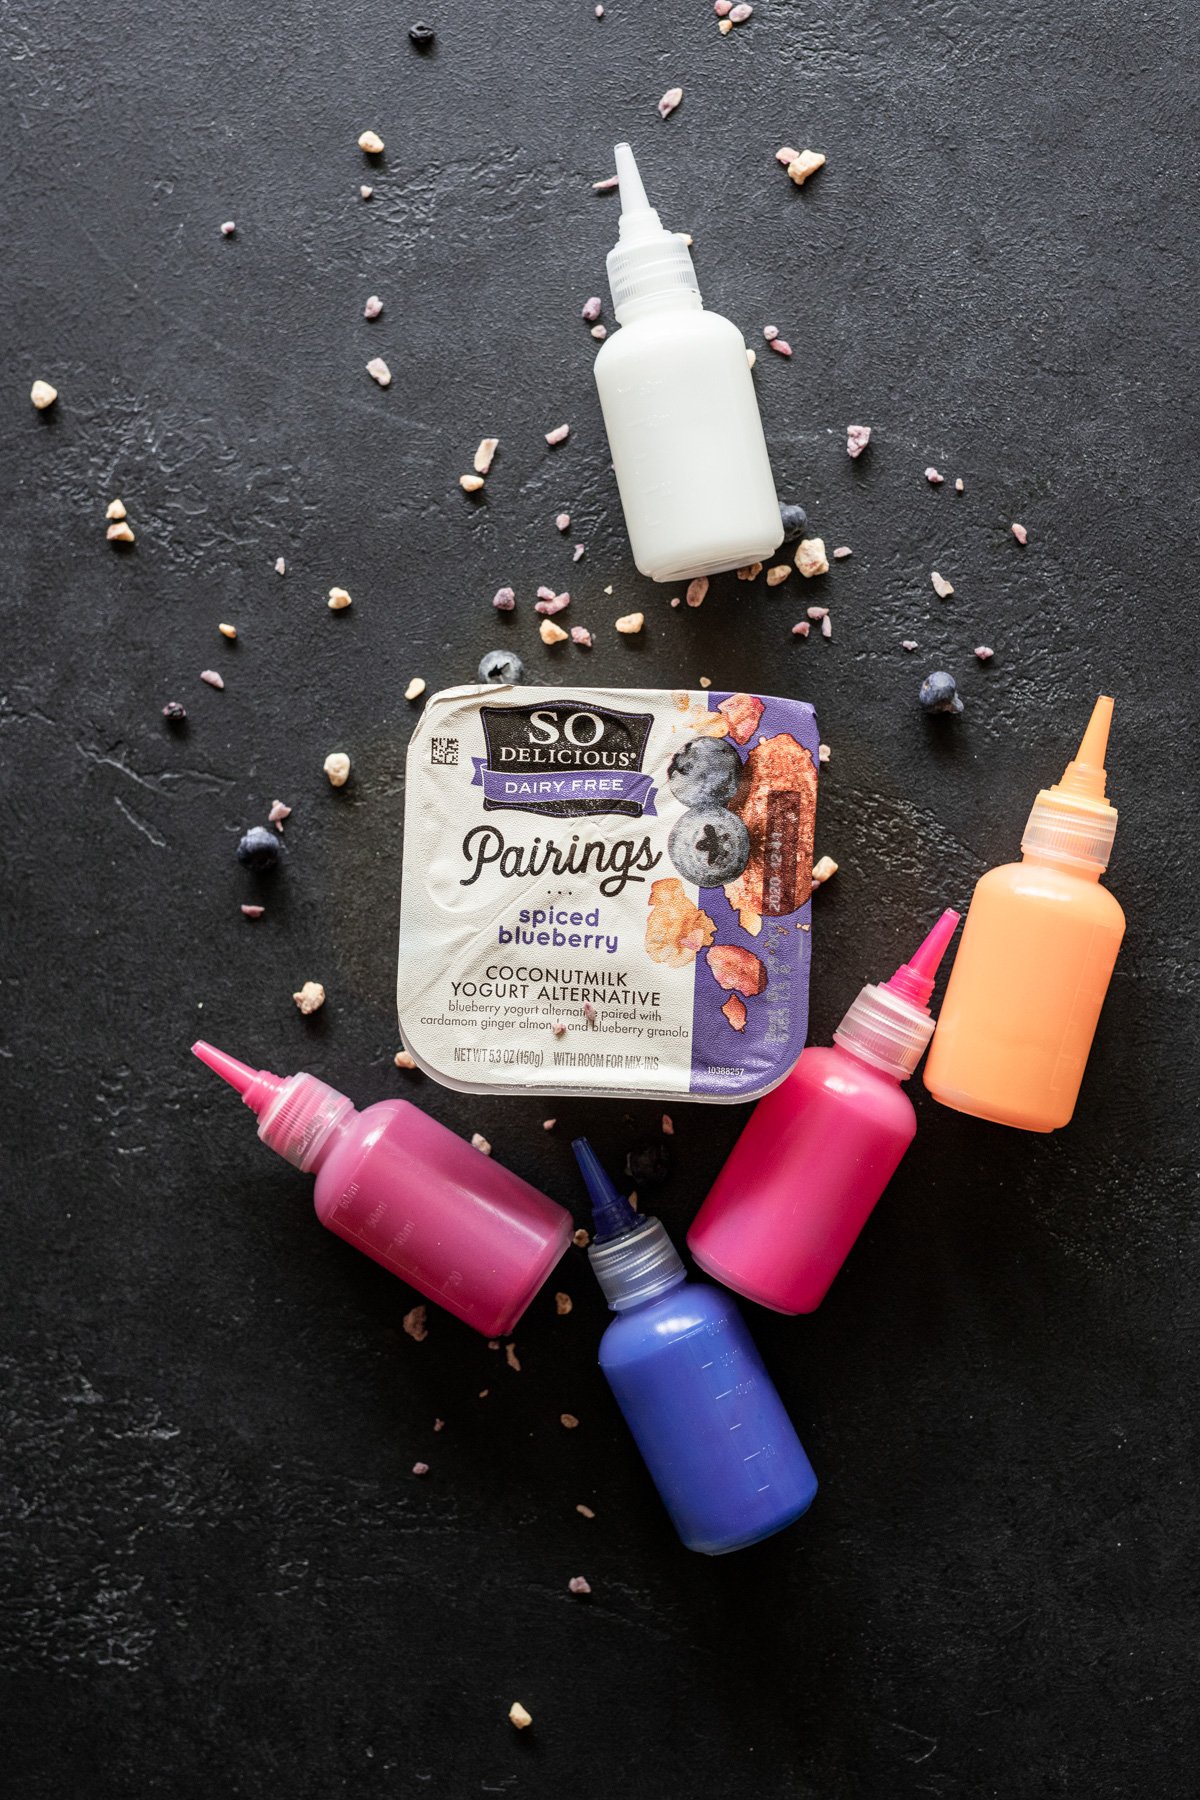 so delicious dairy free pairings in spiced blueberry with tie-dye colored bottles of yogurt